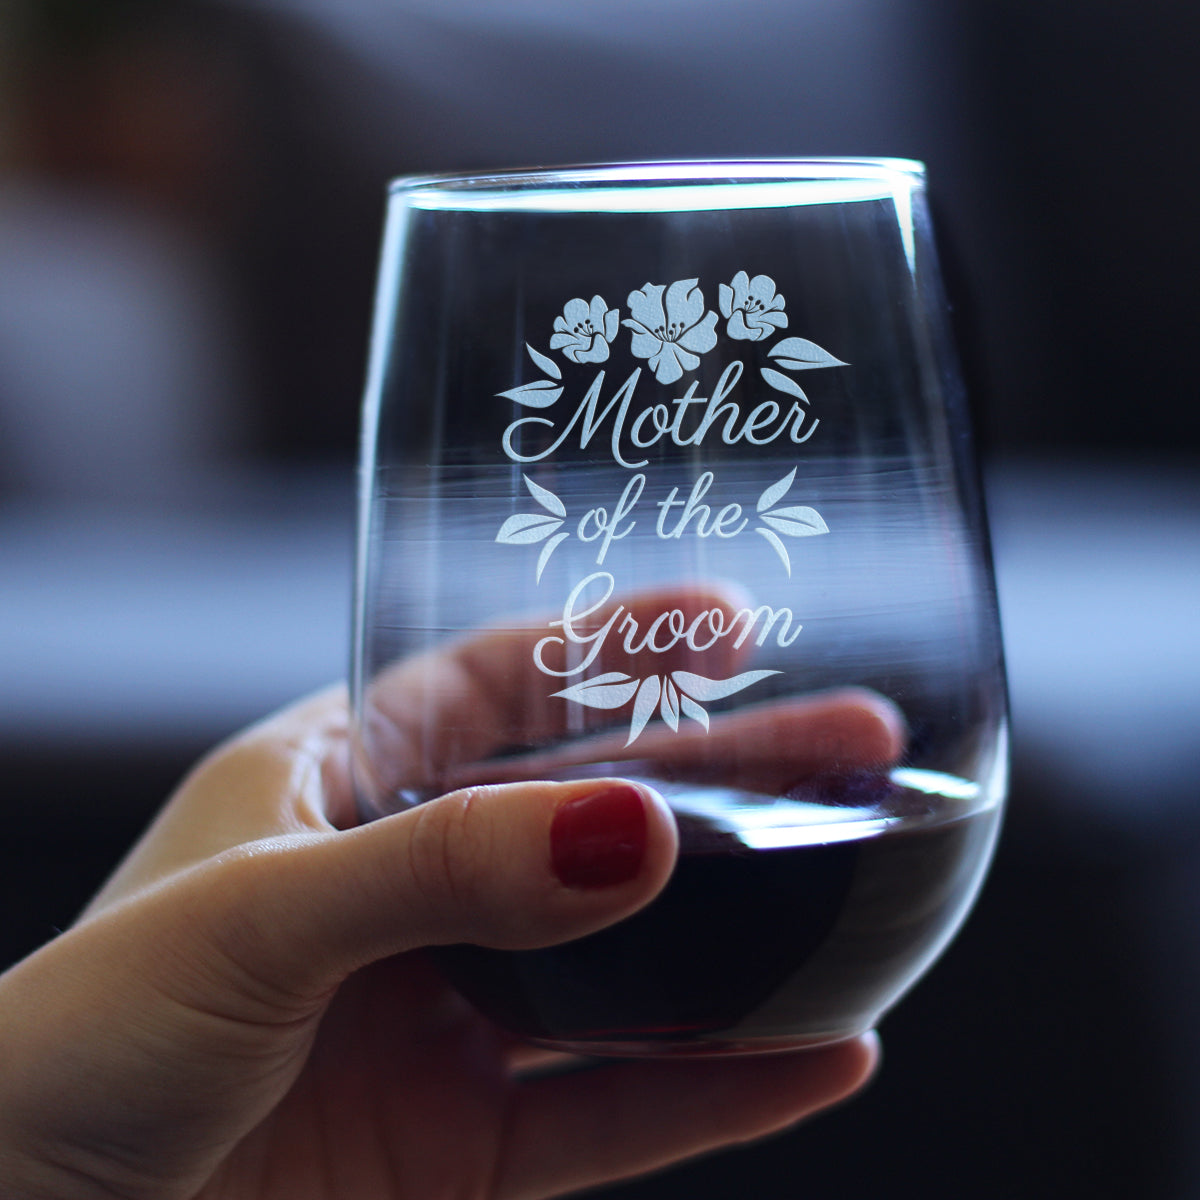 Mother of the Groom Stemless Wine Glass - Unique Wedding Gift for Soon to be Mother-in-Law - Cute Engraved Wedding Cup Gift